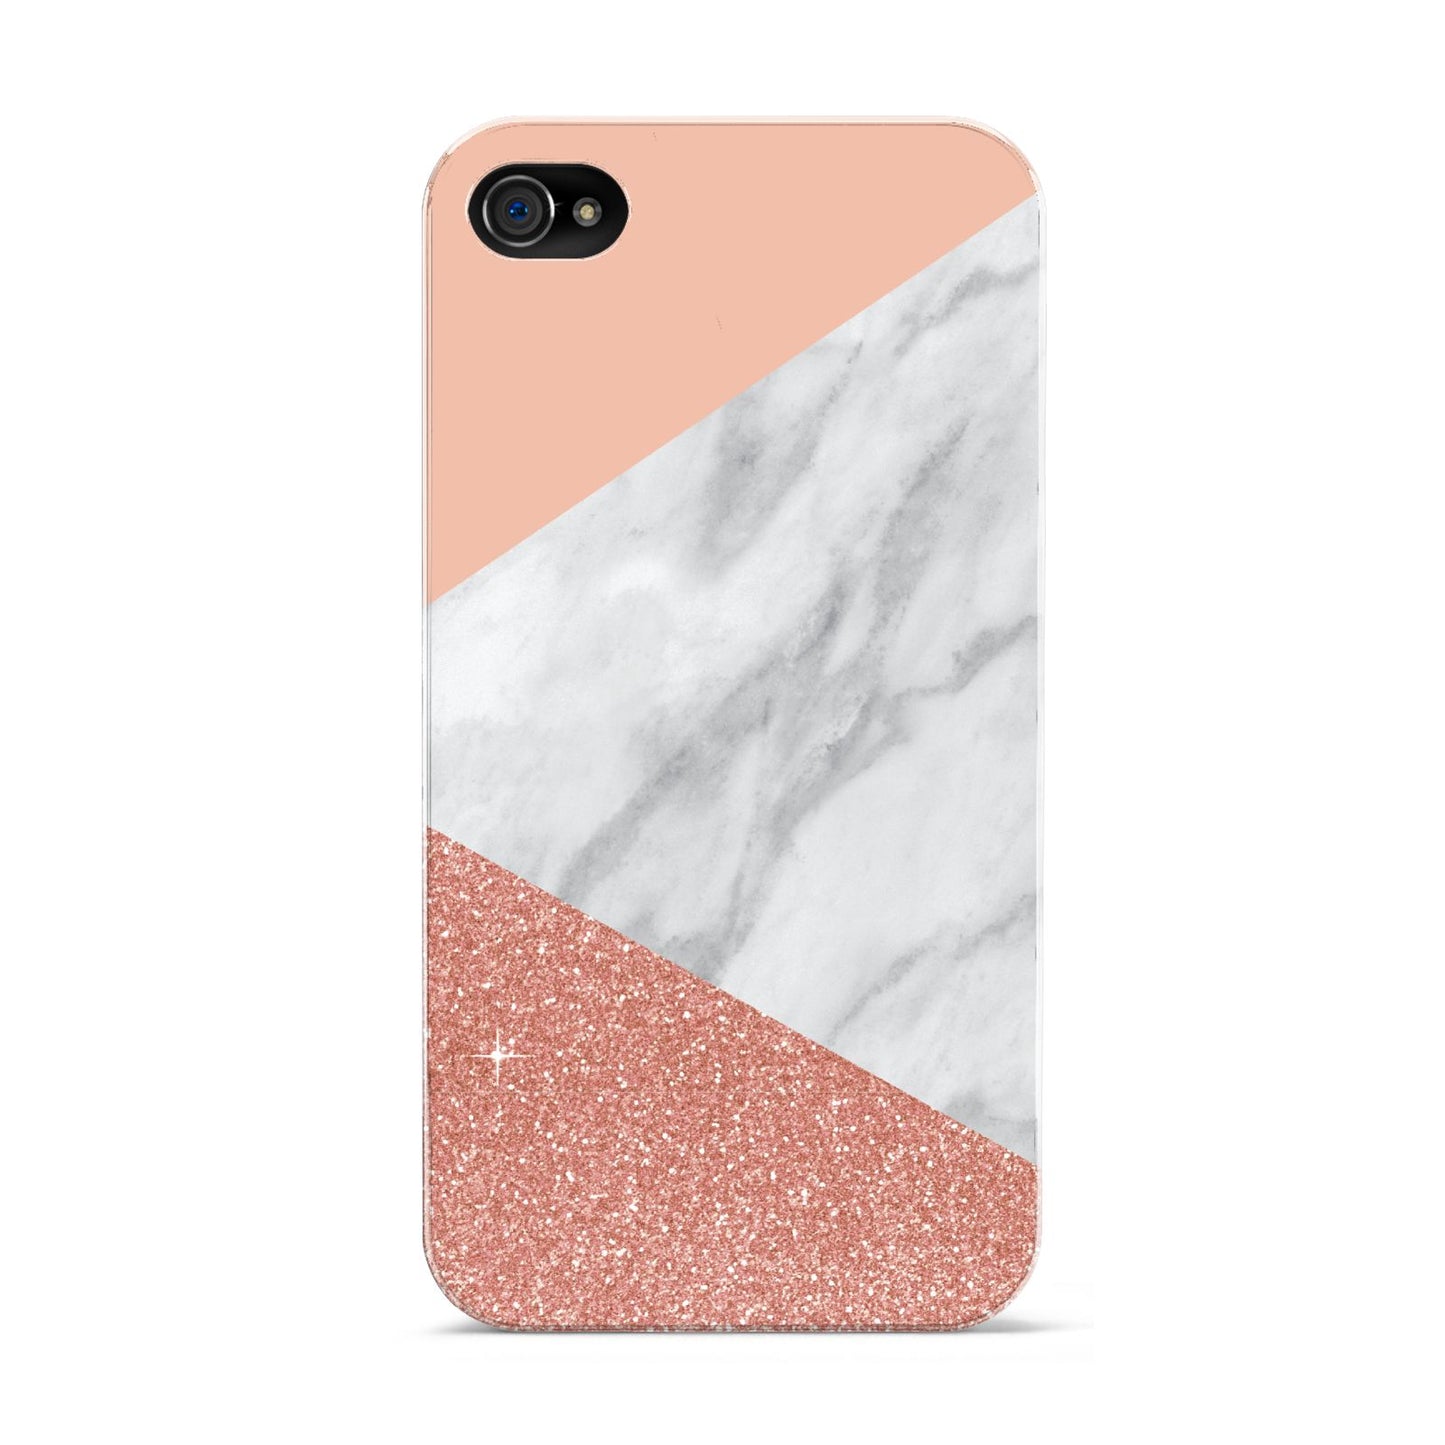 Marble White Rose Gold Apple iPhone 4s Case